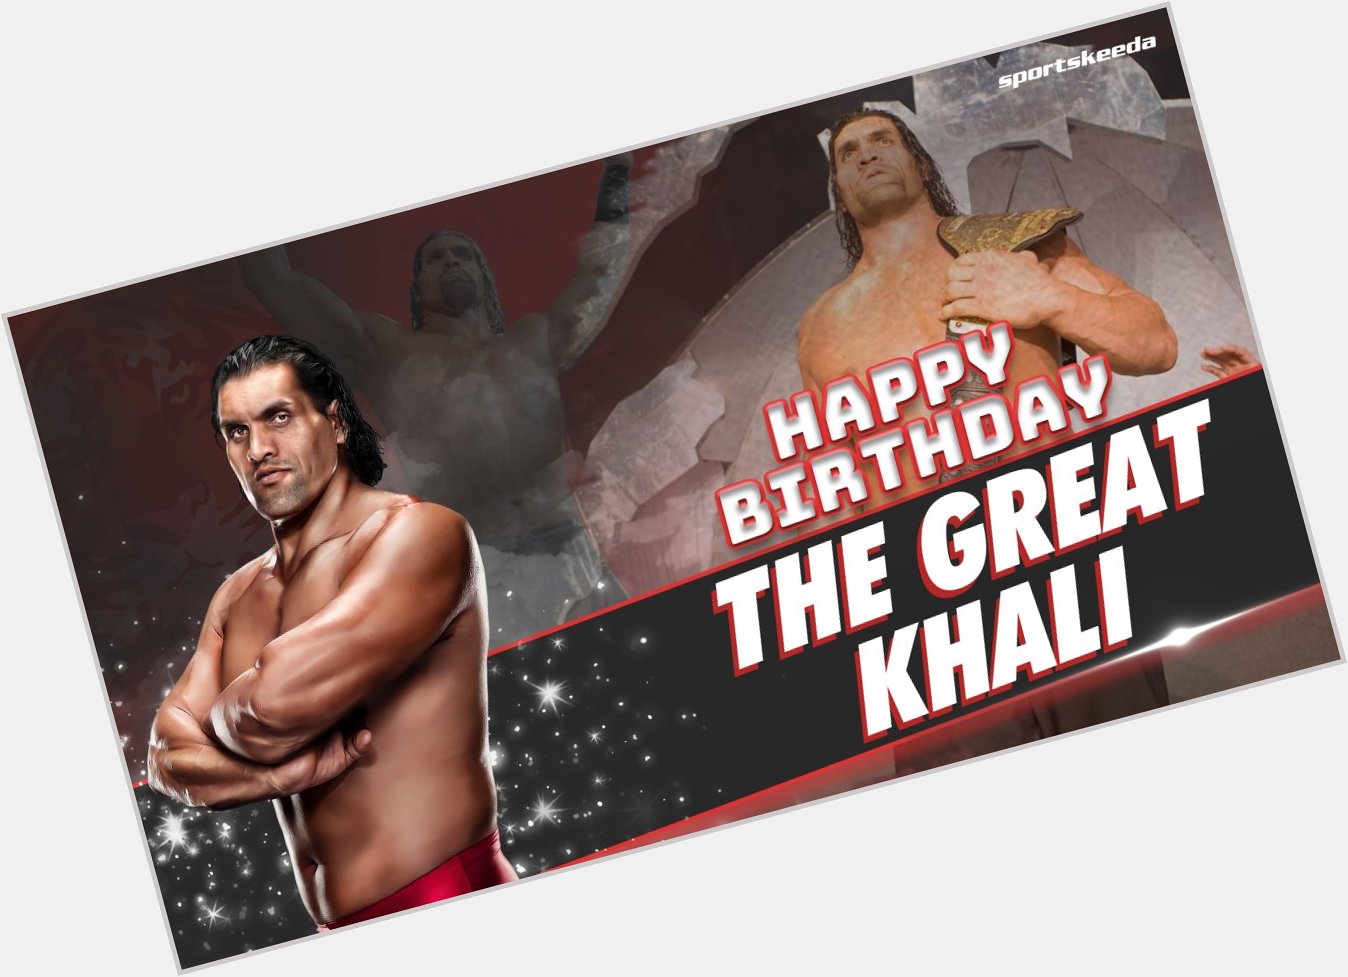 Wishing a very happy birthday to the Hall of Famer, The Great Khali! 